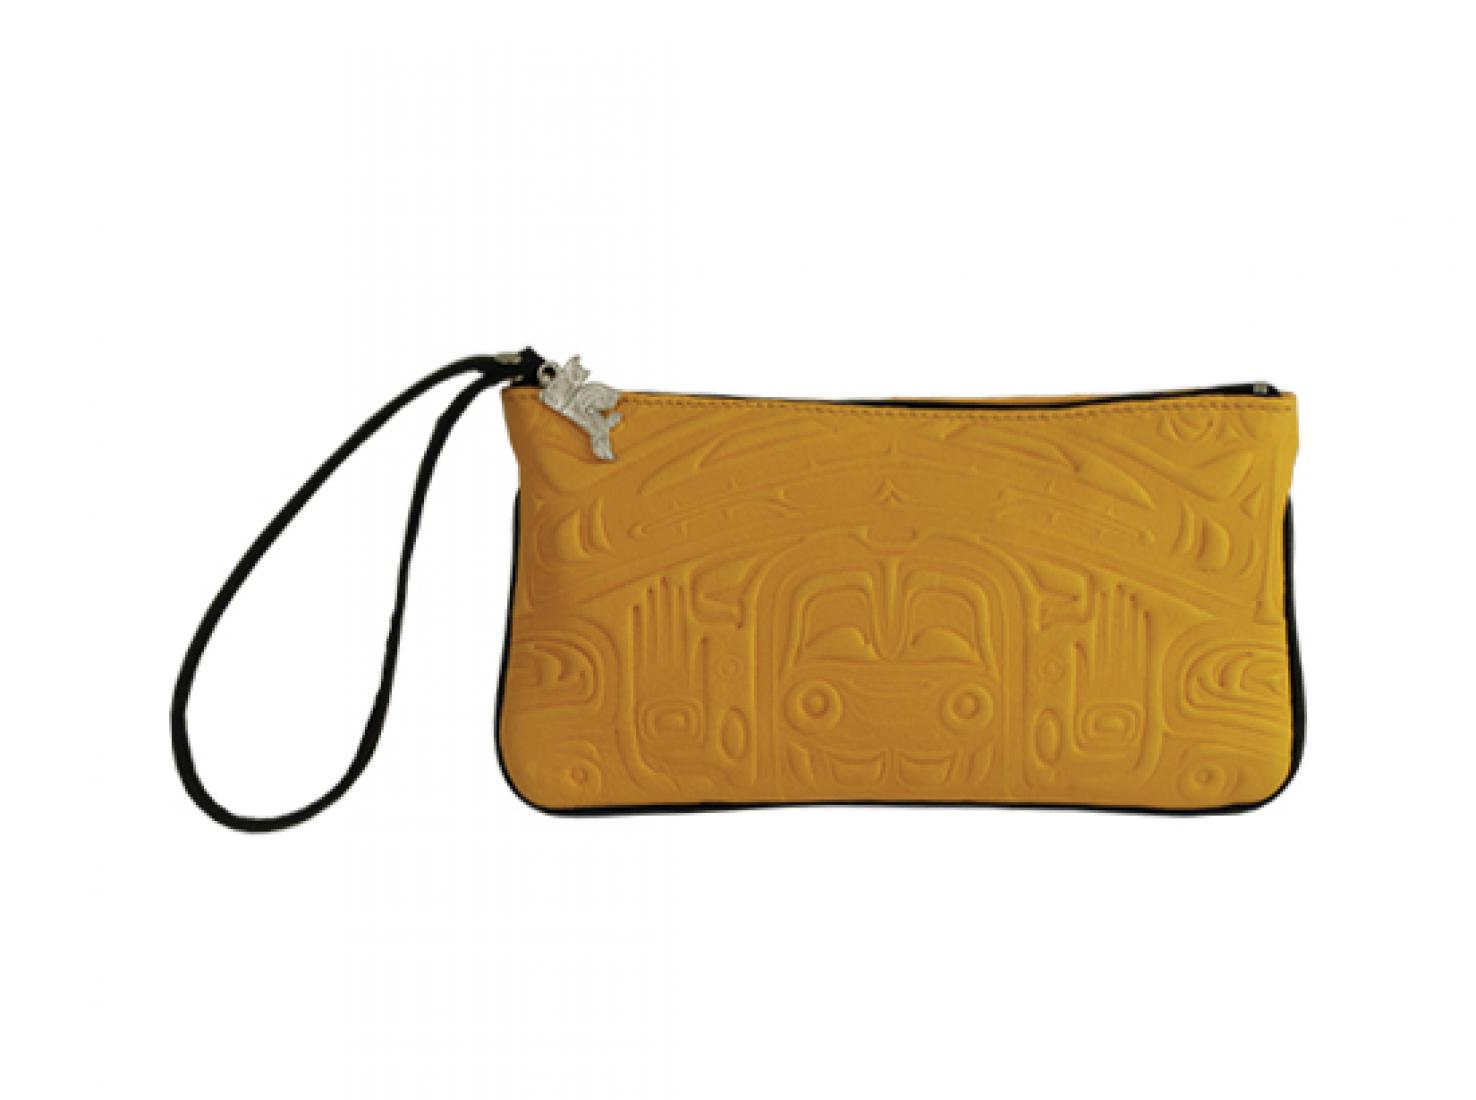 Deer Skin Embossed Wristlet Pouch with Bear Box Design by Clifton Fred, Yellow